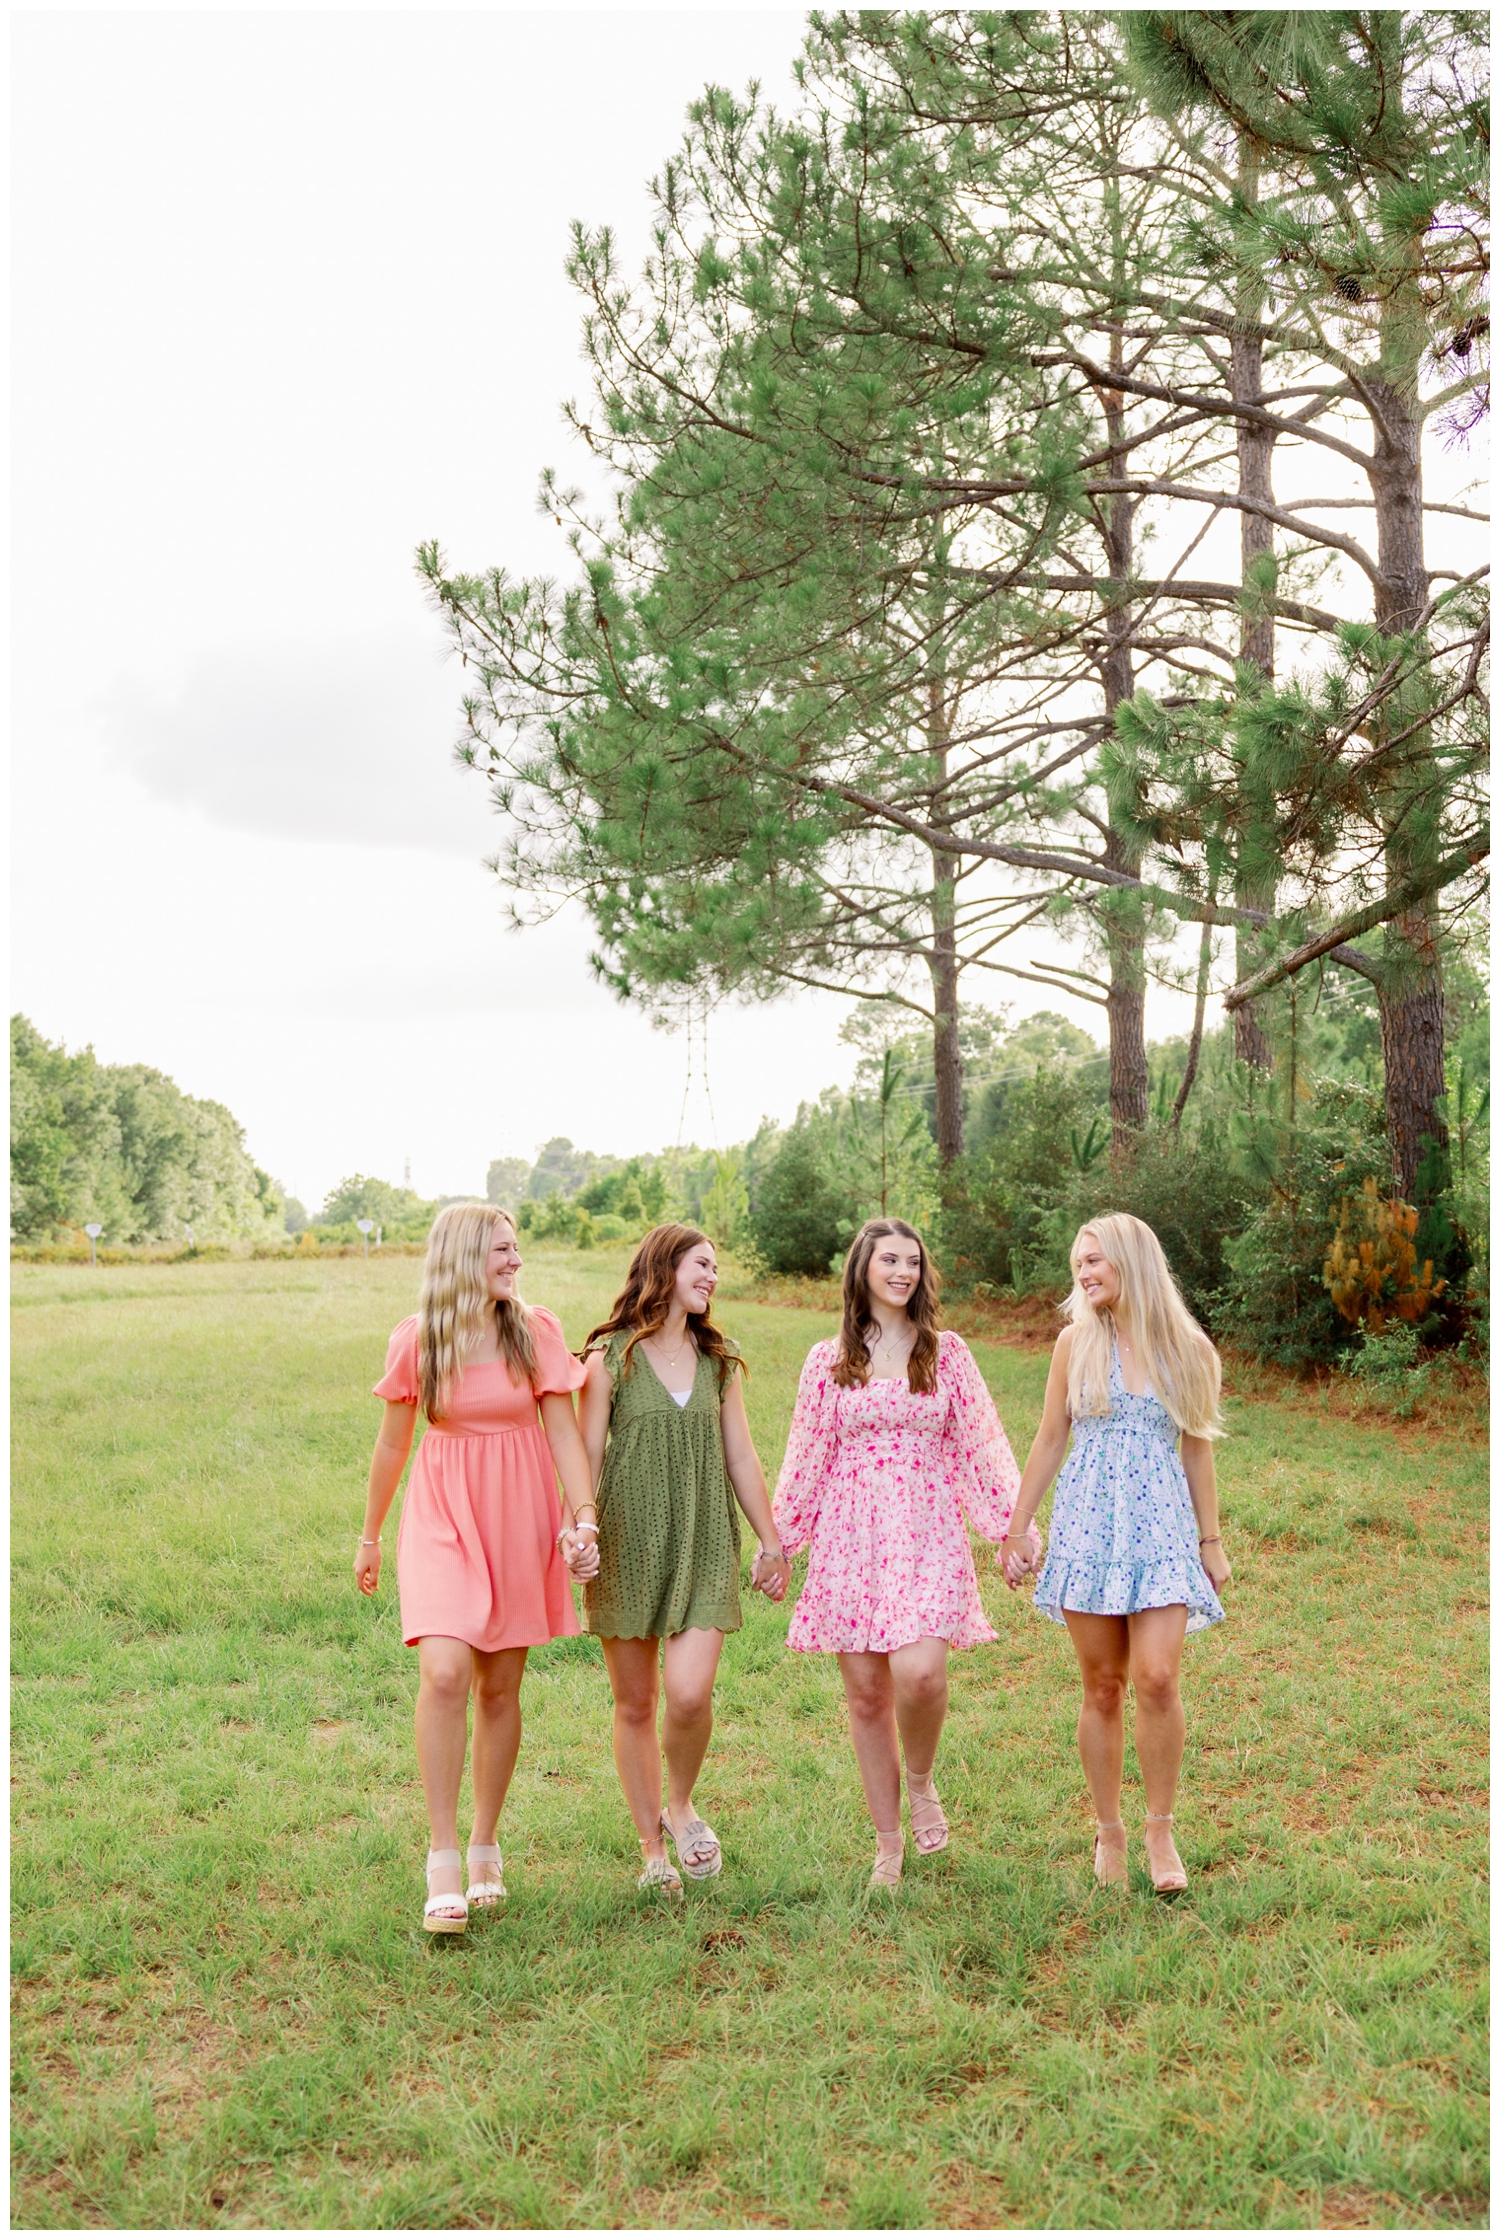 Dawson & Pearland High School Spokesmodel team walking and holding hands